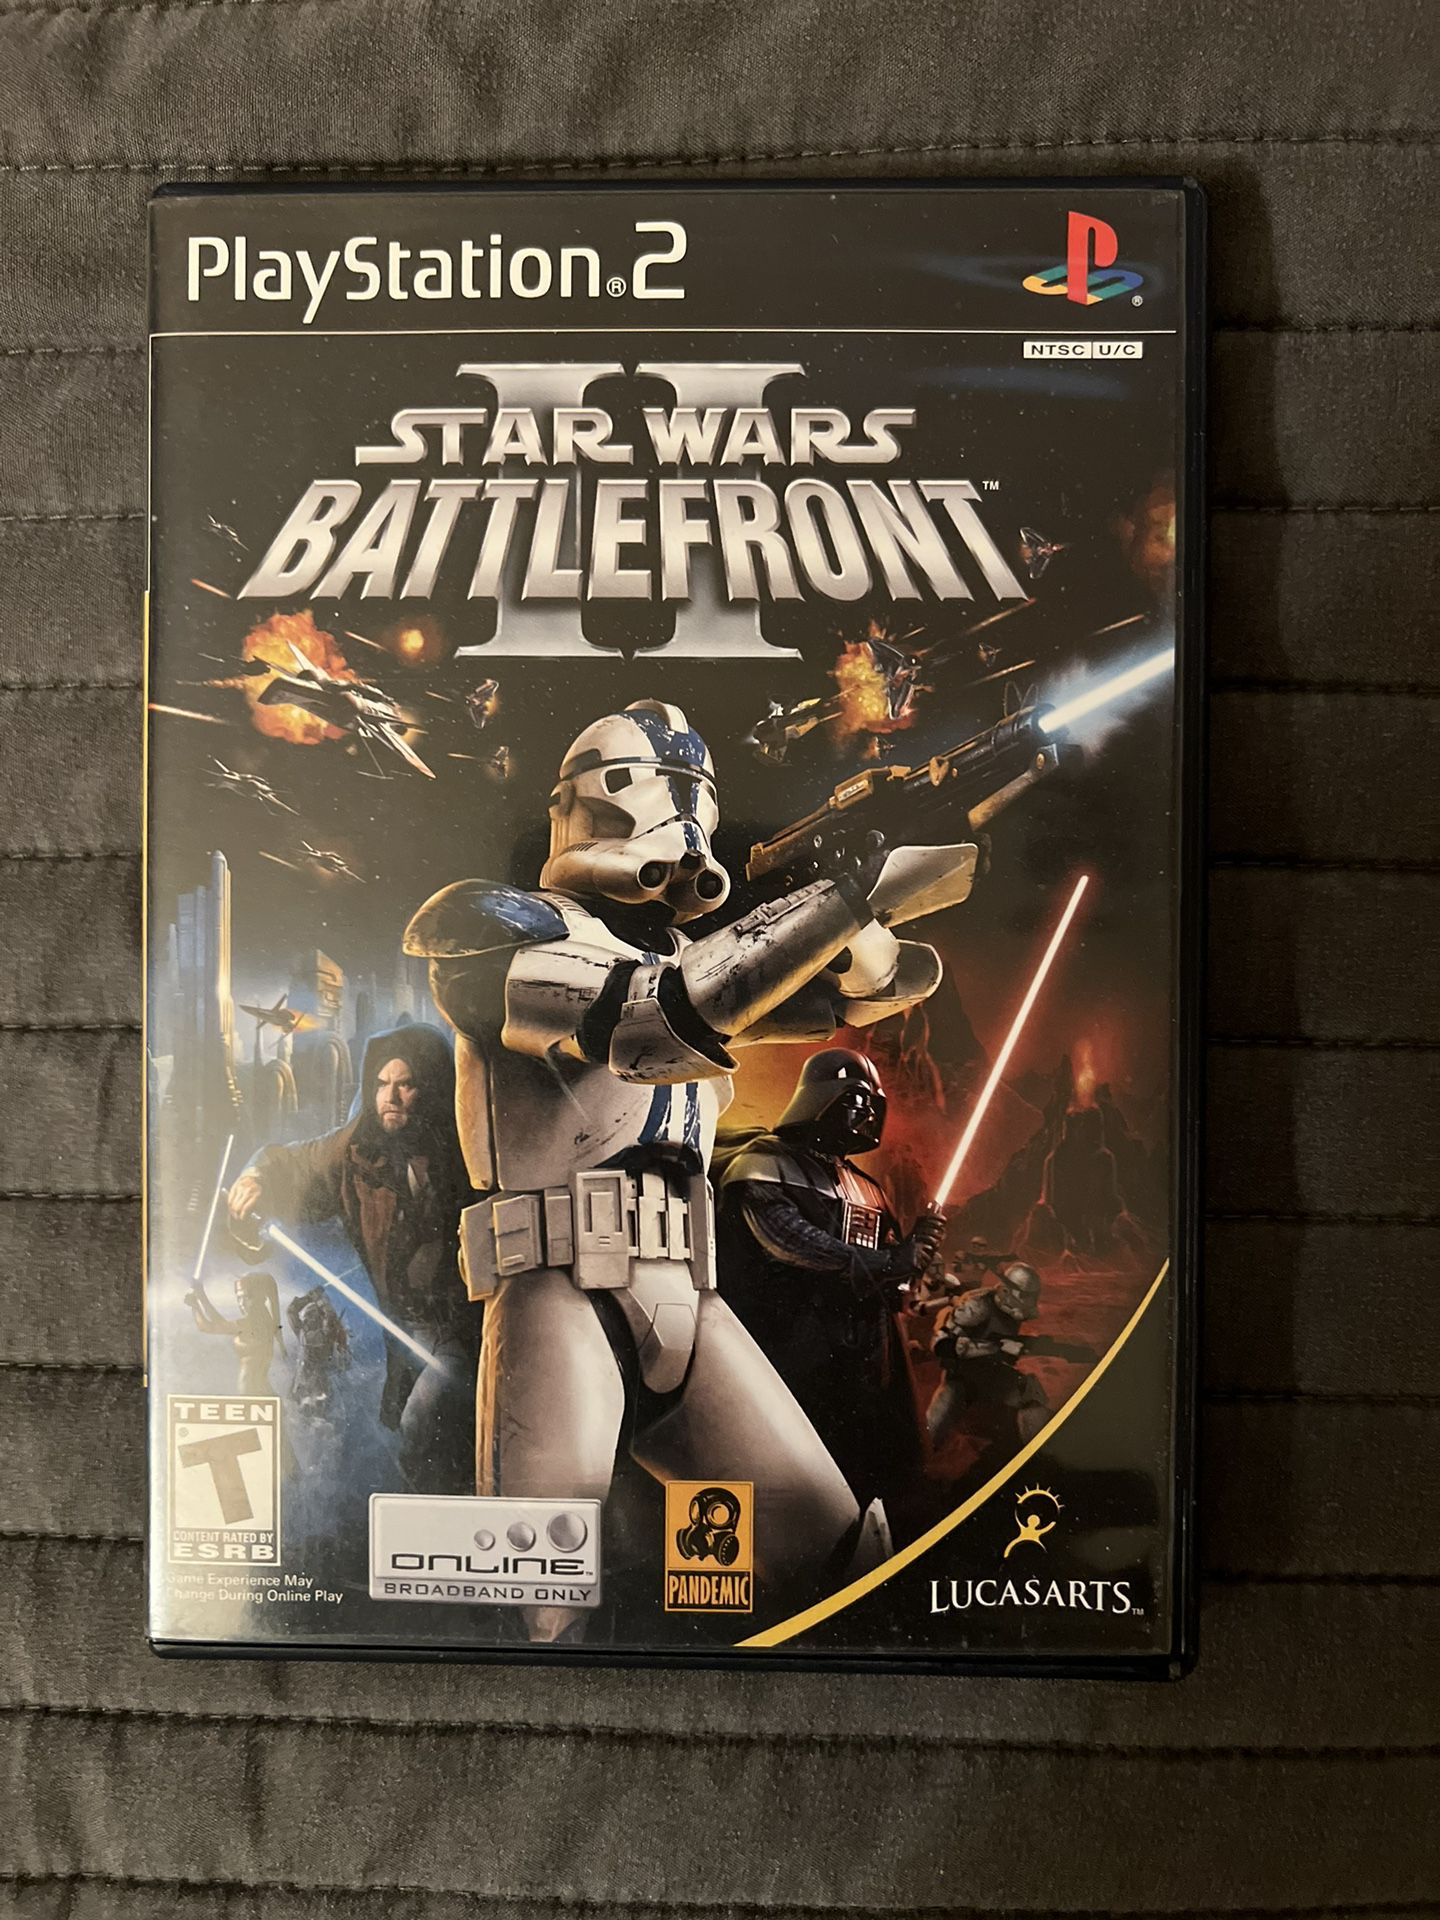 Star Wars Battlefront 2 PS2 for Sale in Stockton, CA - OfferUp